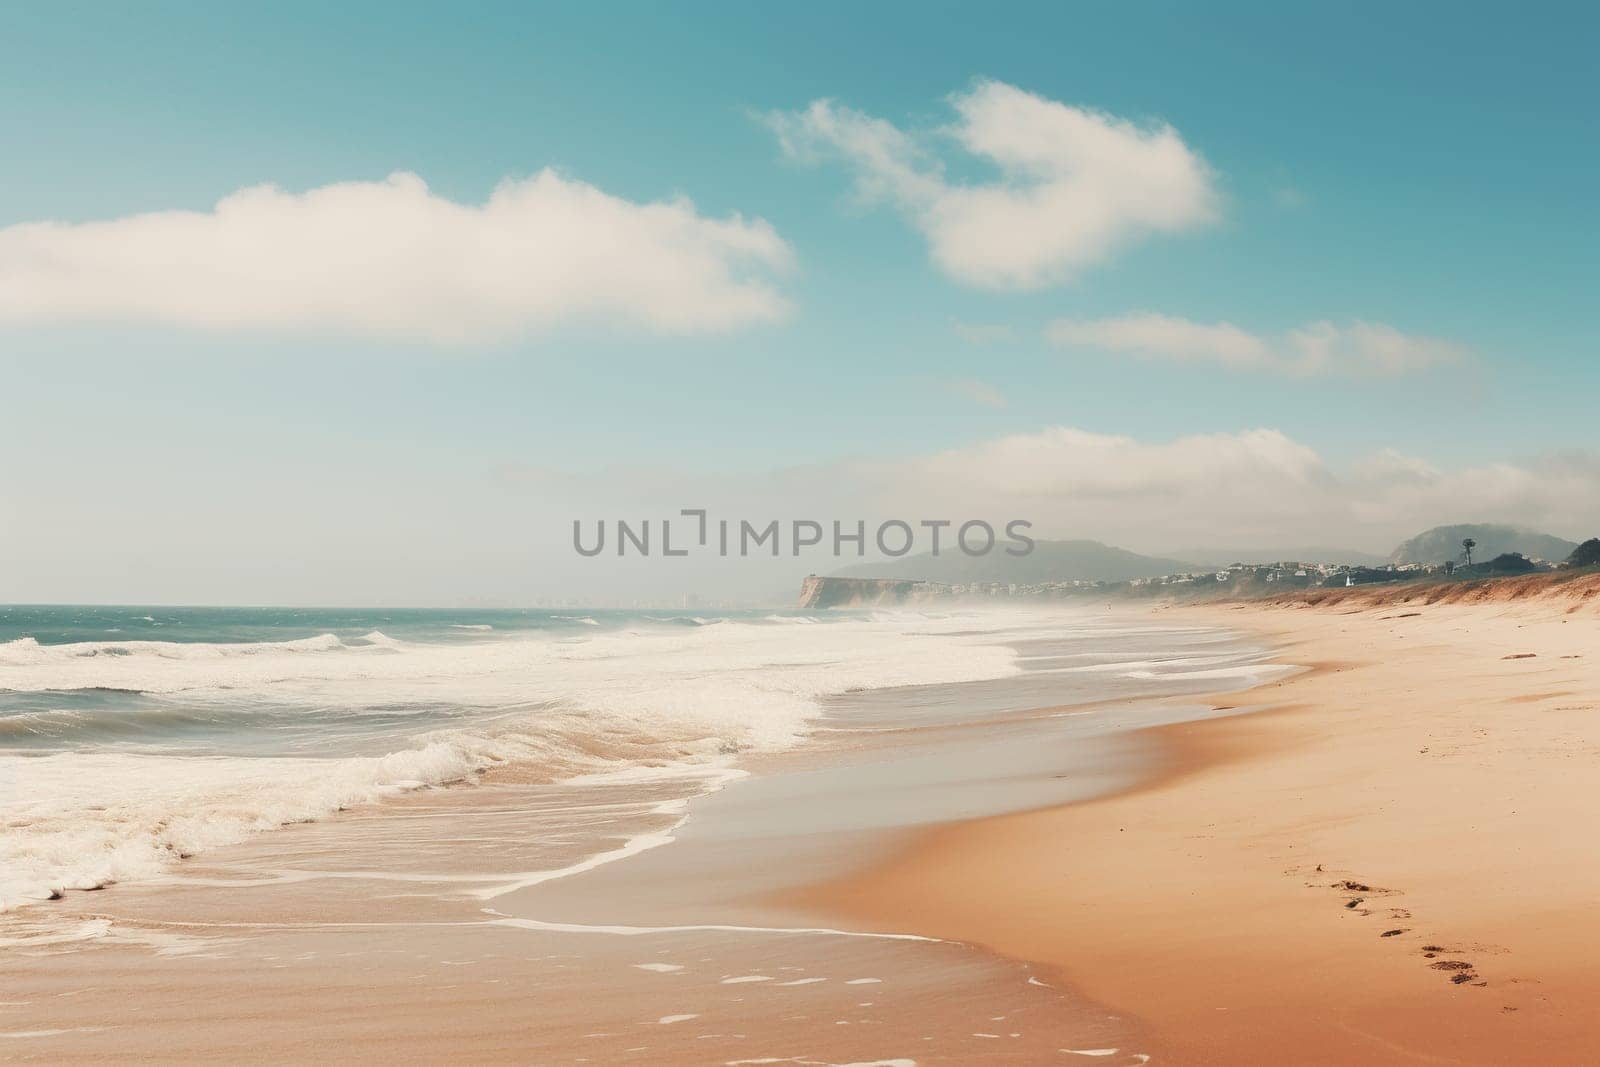 Seascape with an empty beach and beautiful blue water. Vacation, travel, beach holiday concept.